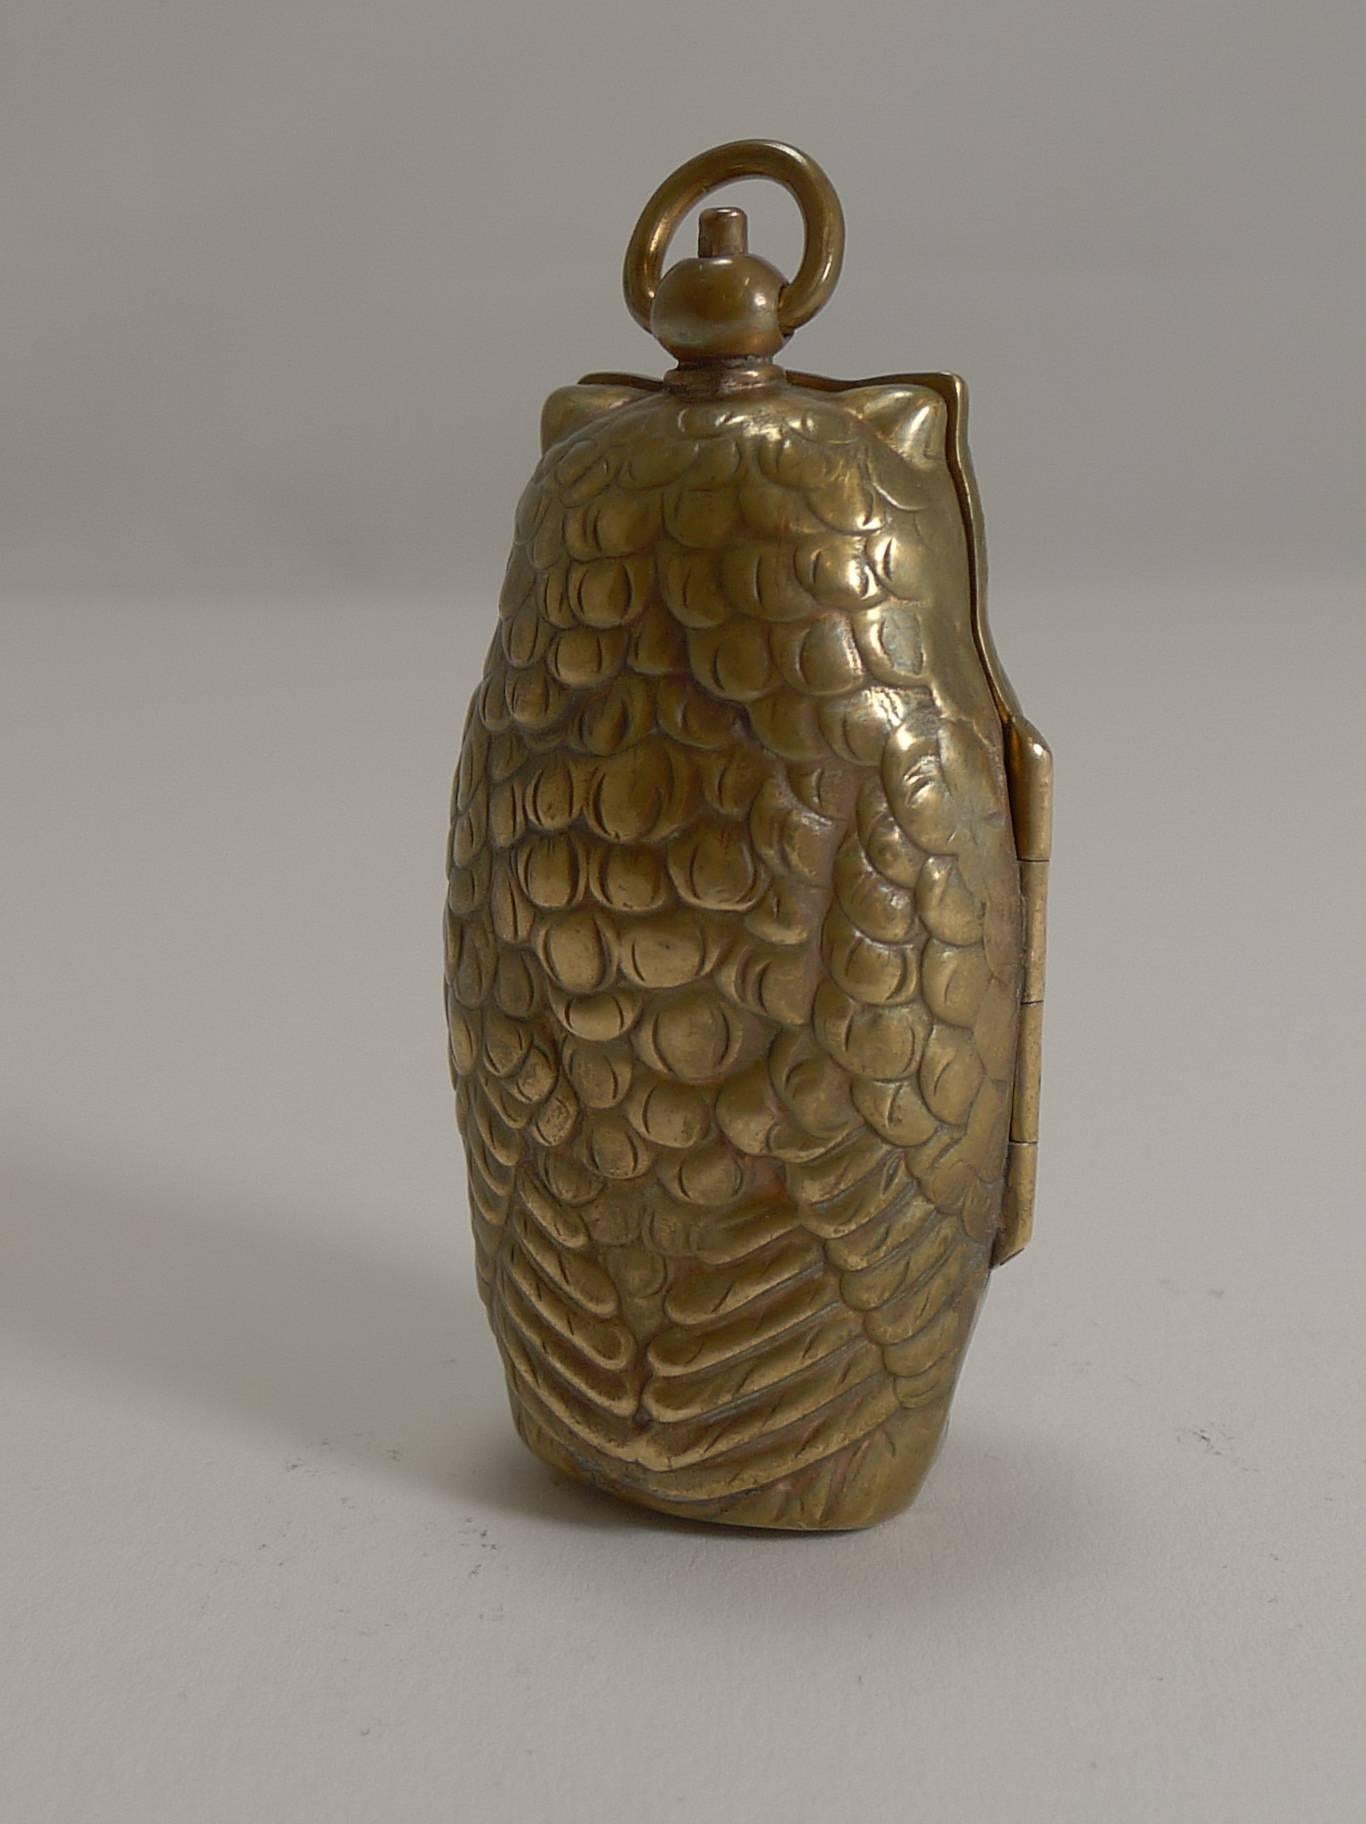 British Antique English Figural Sovereign Case, Owl with Glass Eyes